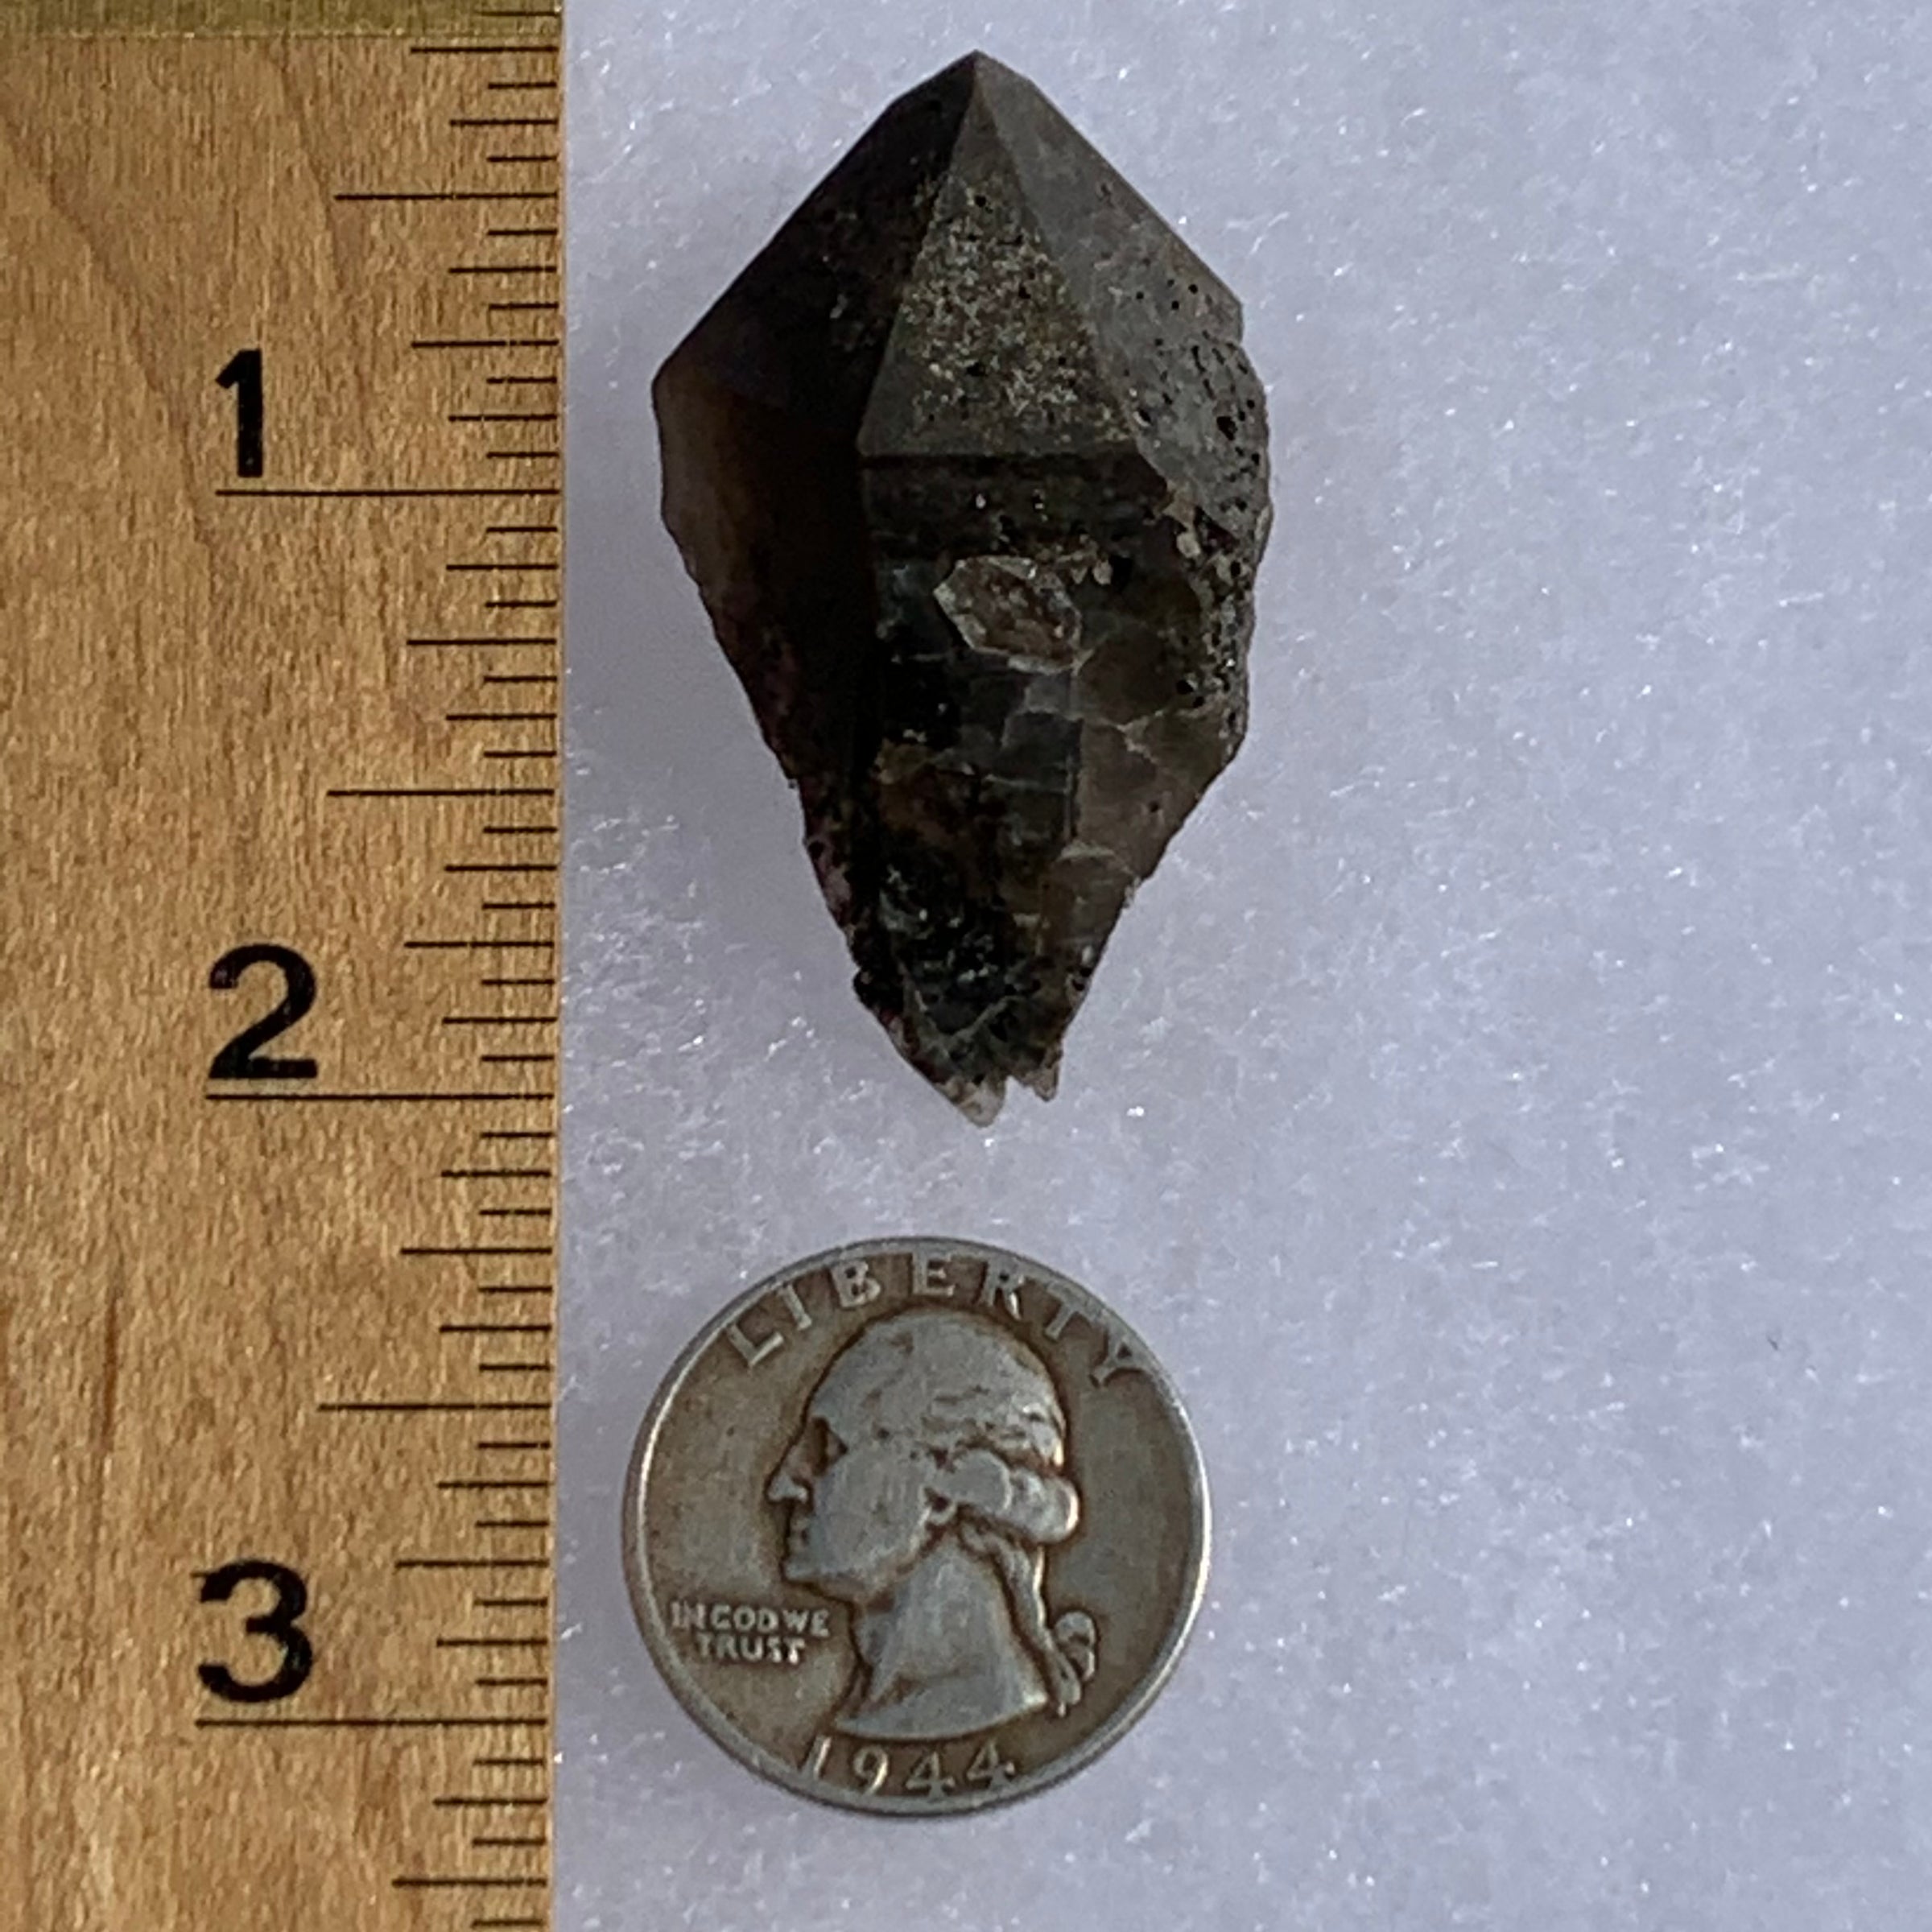 medium and tiny brookite crystals on a smokey quartz point next to a ruler and a quarter for scale